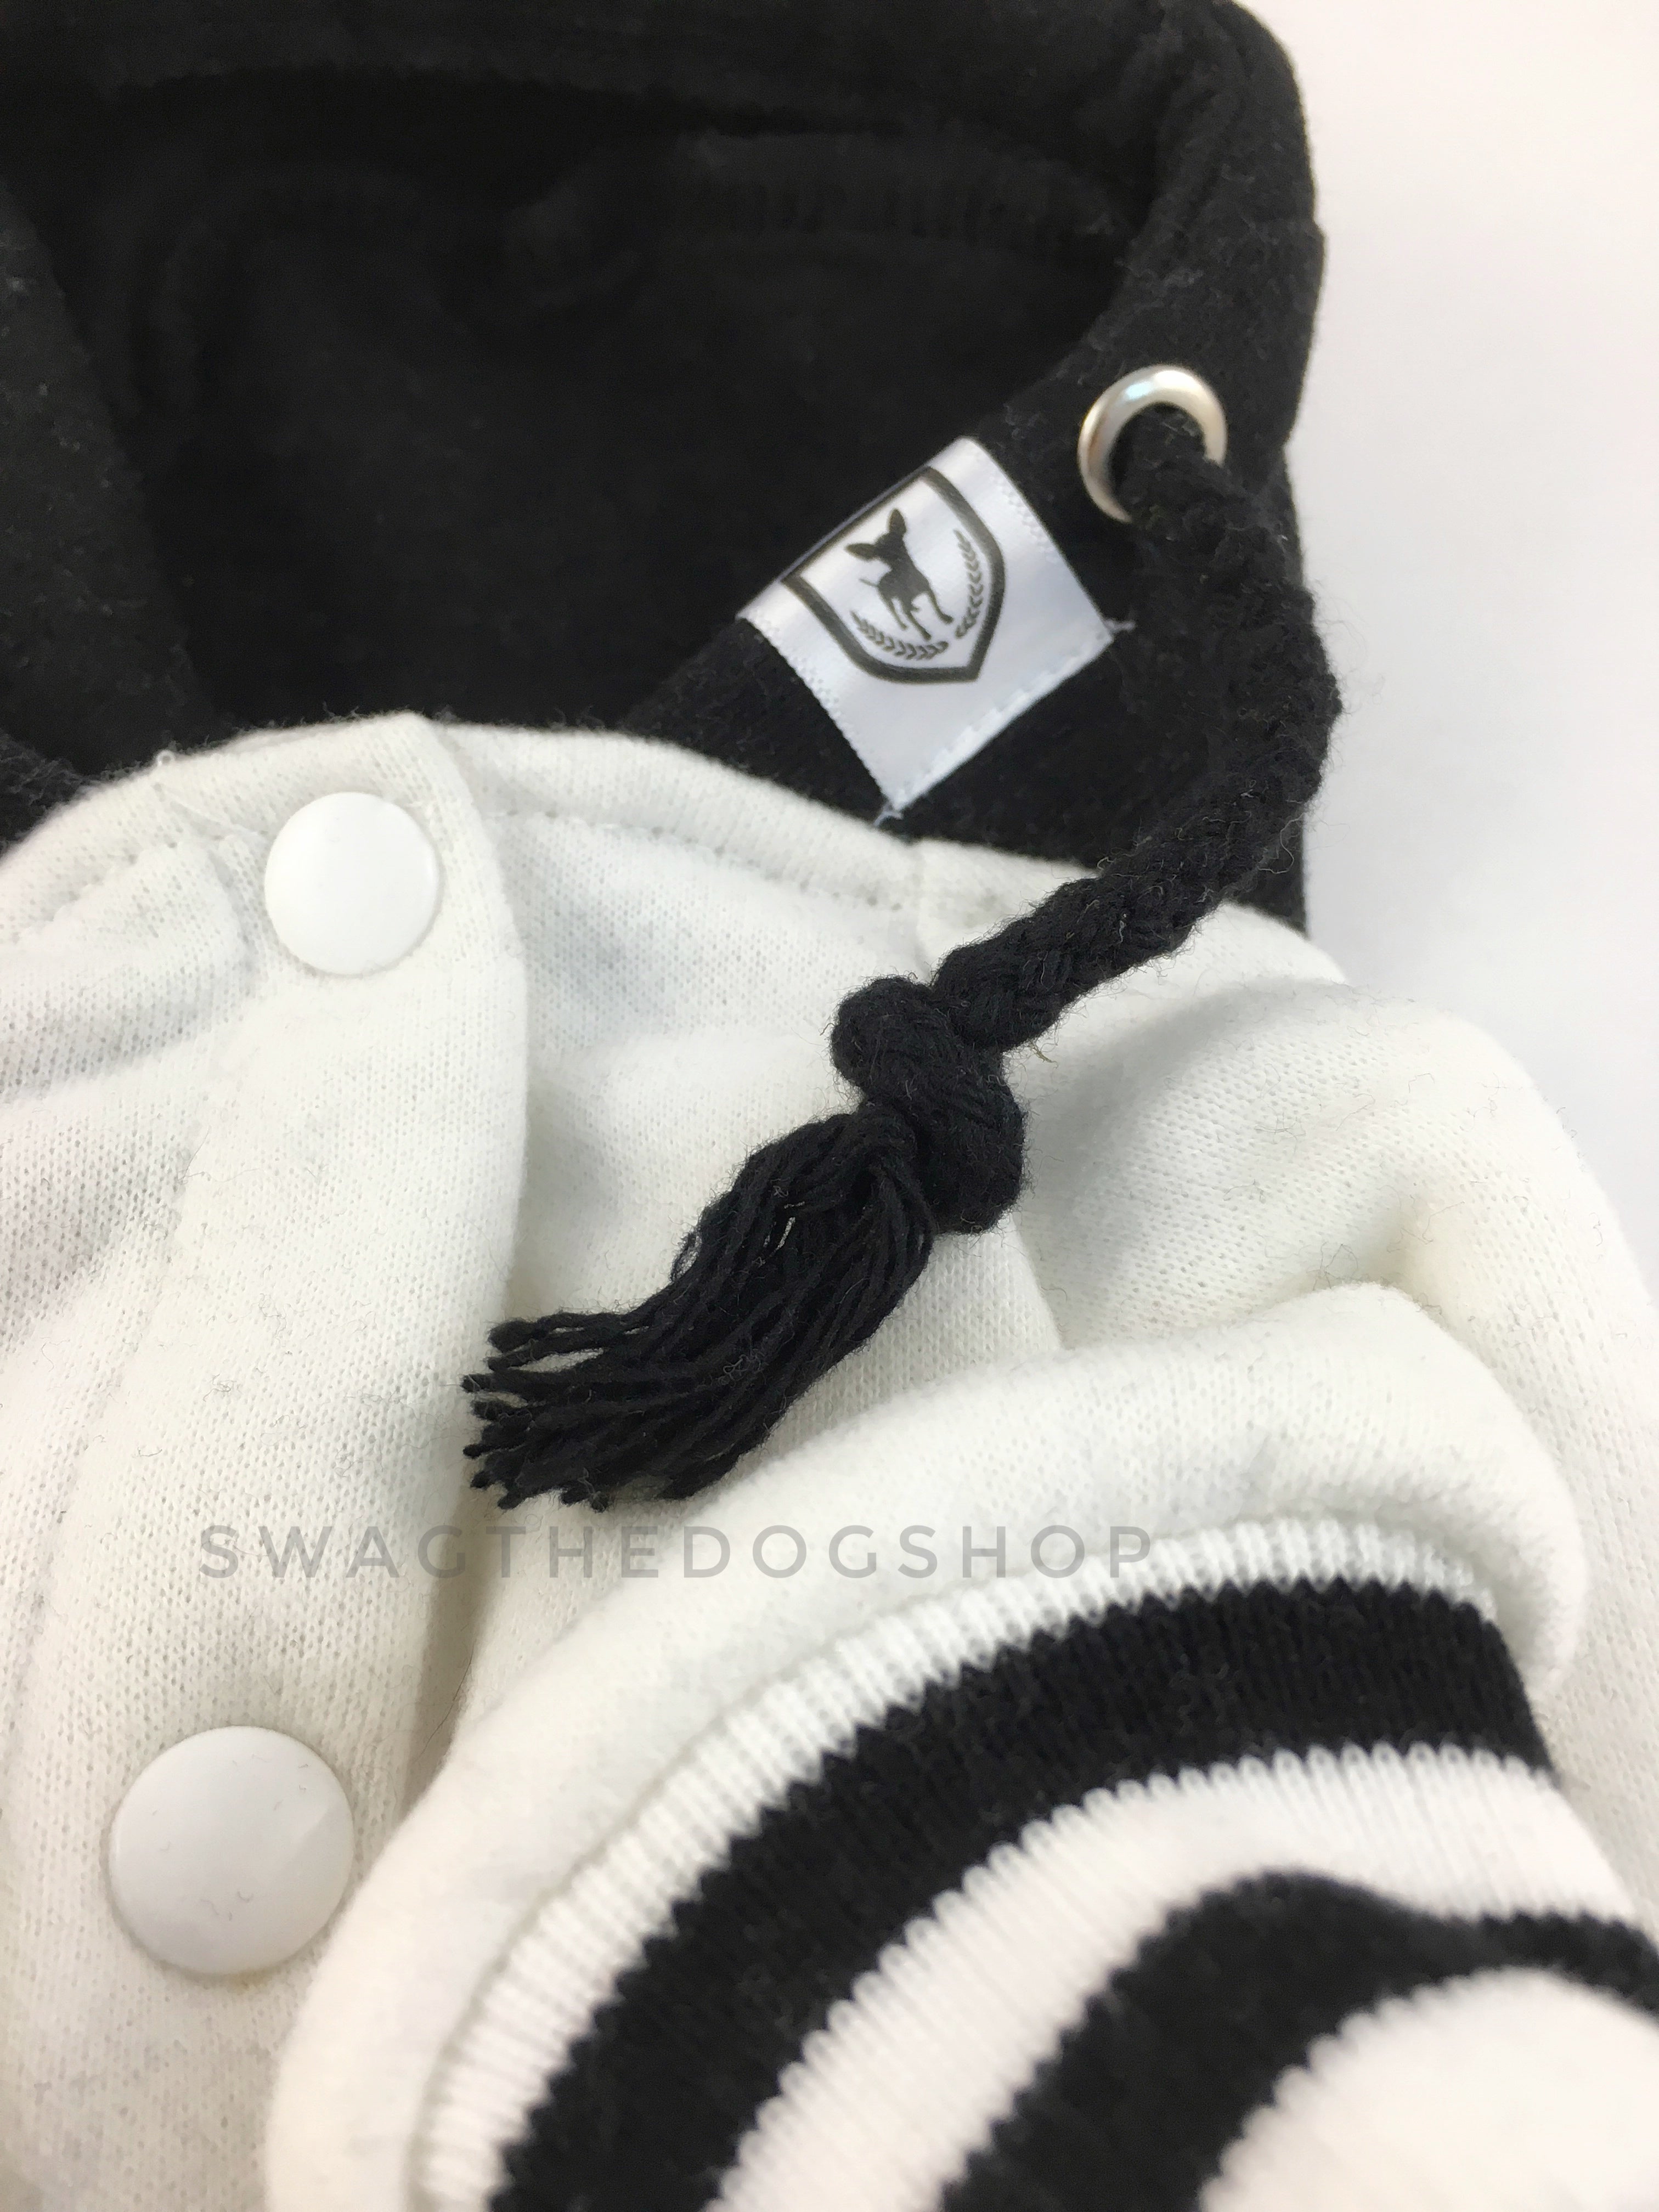 Parklife Black and White Sports Hoodie - Close Up View of Label and Hood. Black and White Sports Hoodie